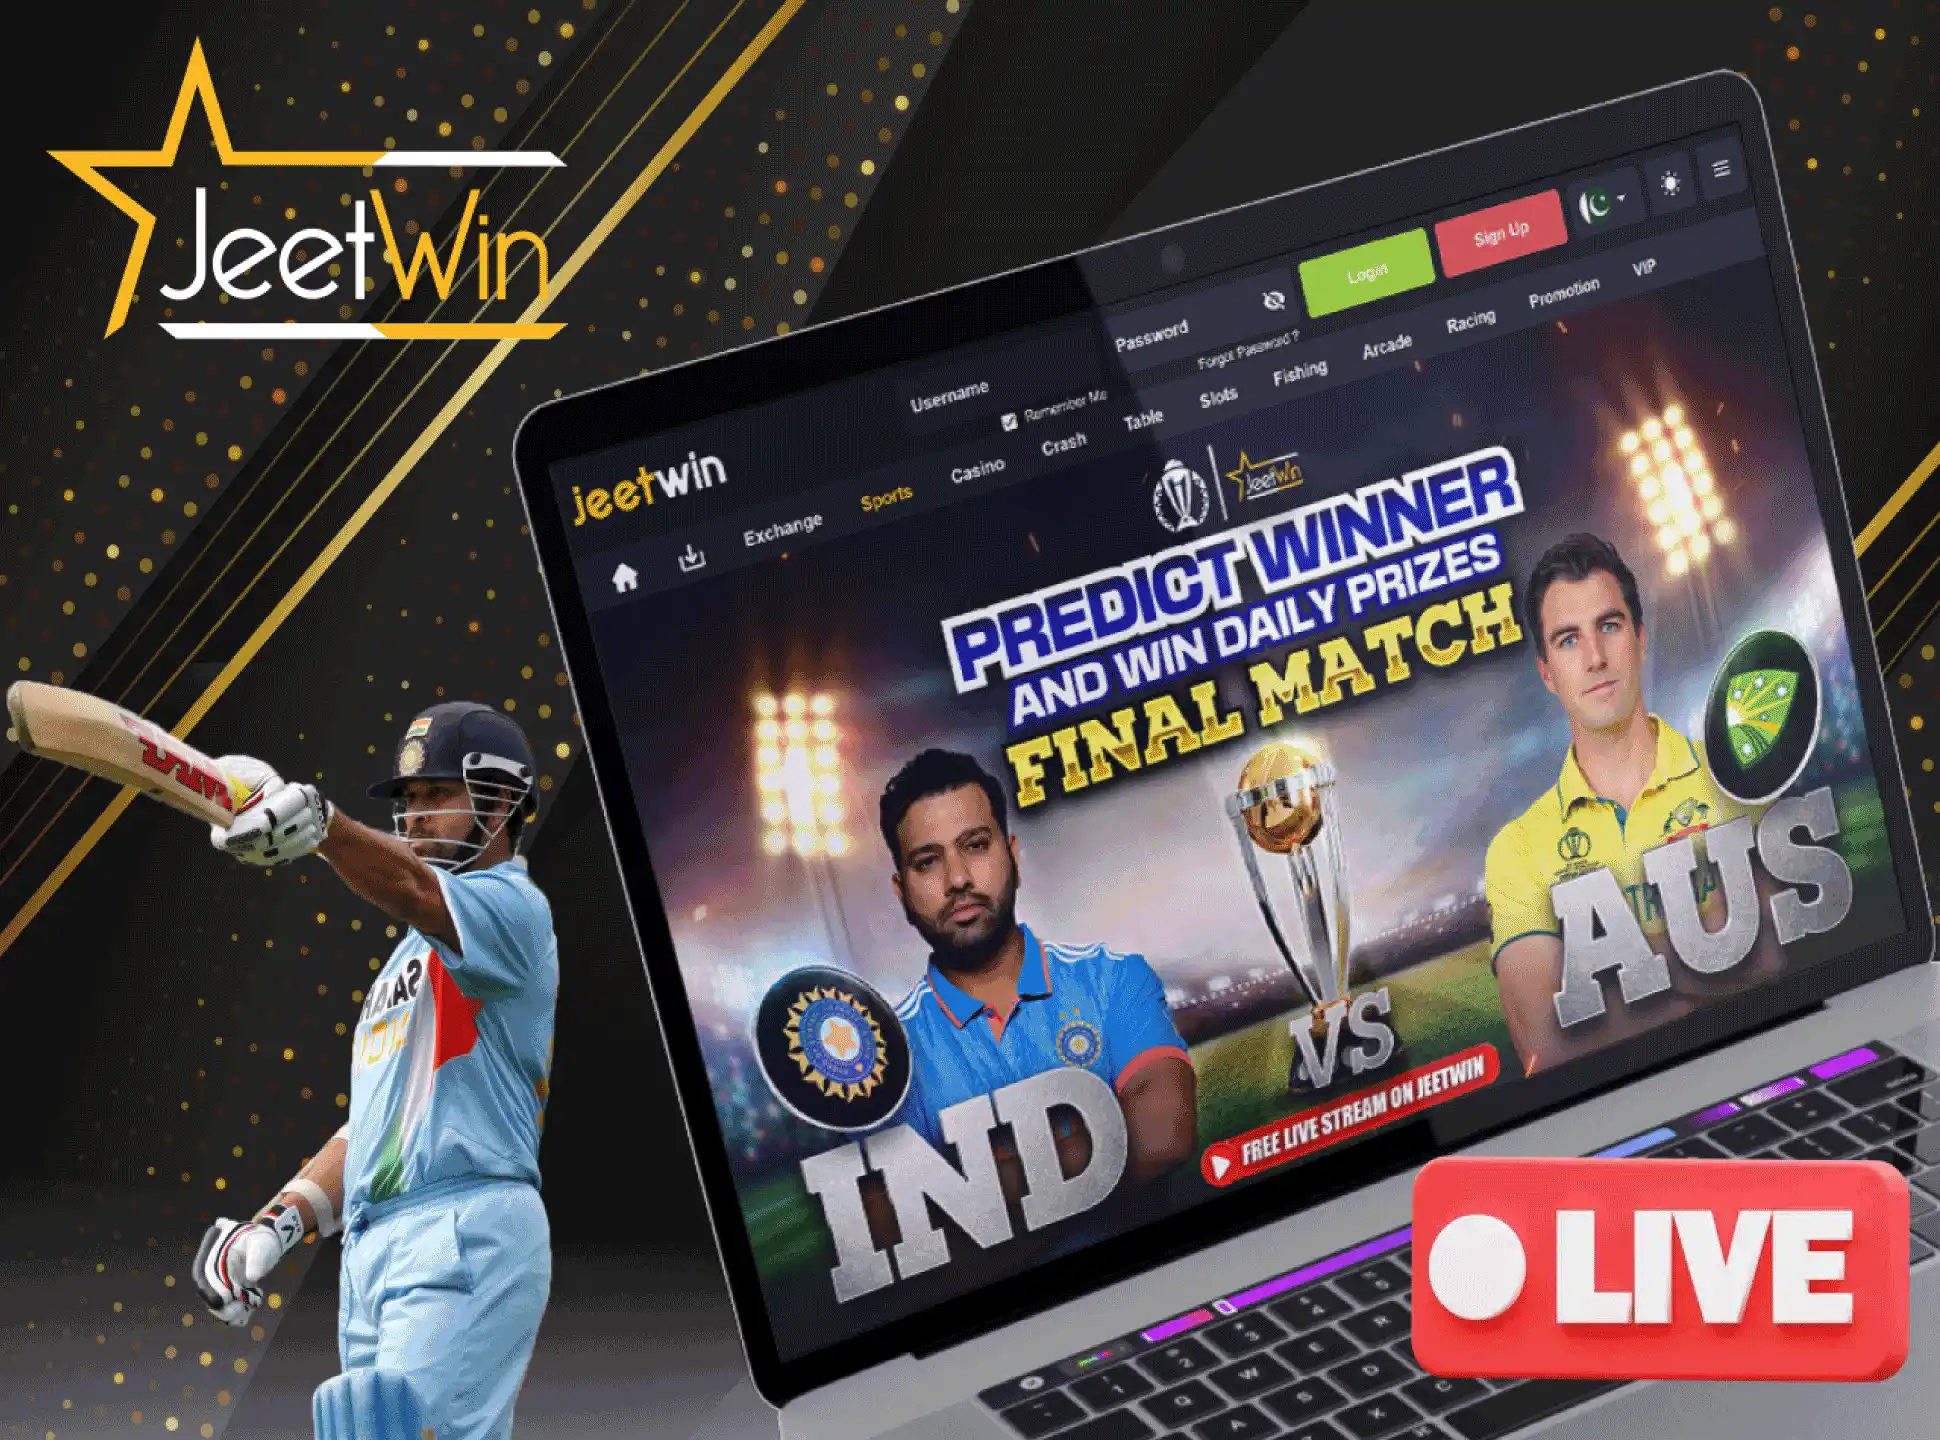 Place your bets on different outcomes as the match progresses with live betting.